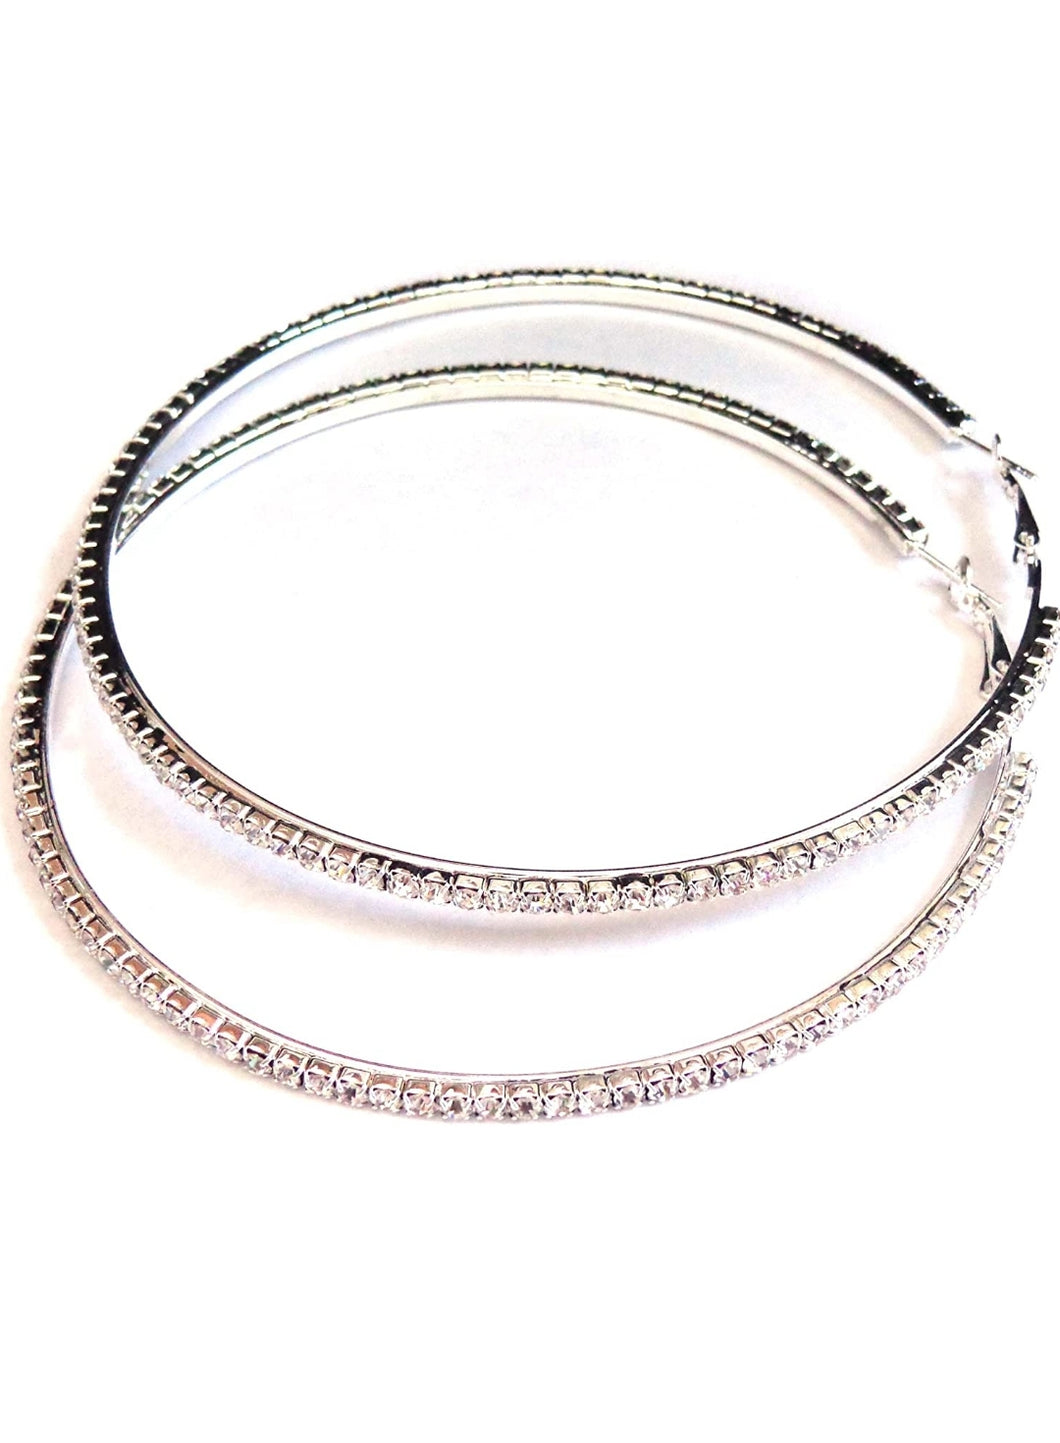 Add some sparkle and shine with these beautifully detailed silver hoop earrings. Featuring jeweled detailing on a silver-tone setting, these earrings are perfect for all occasions.